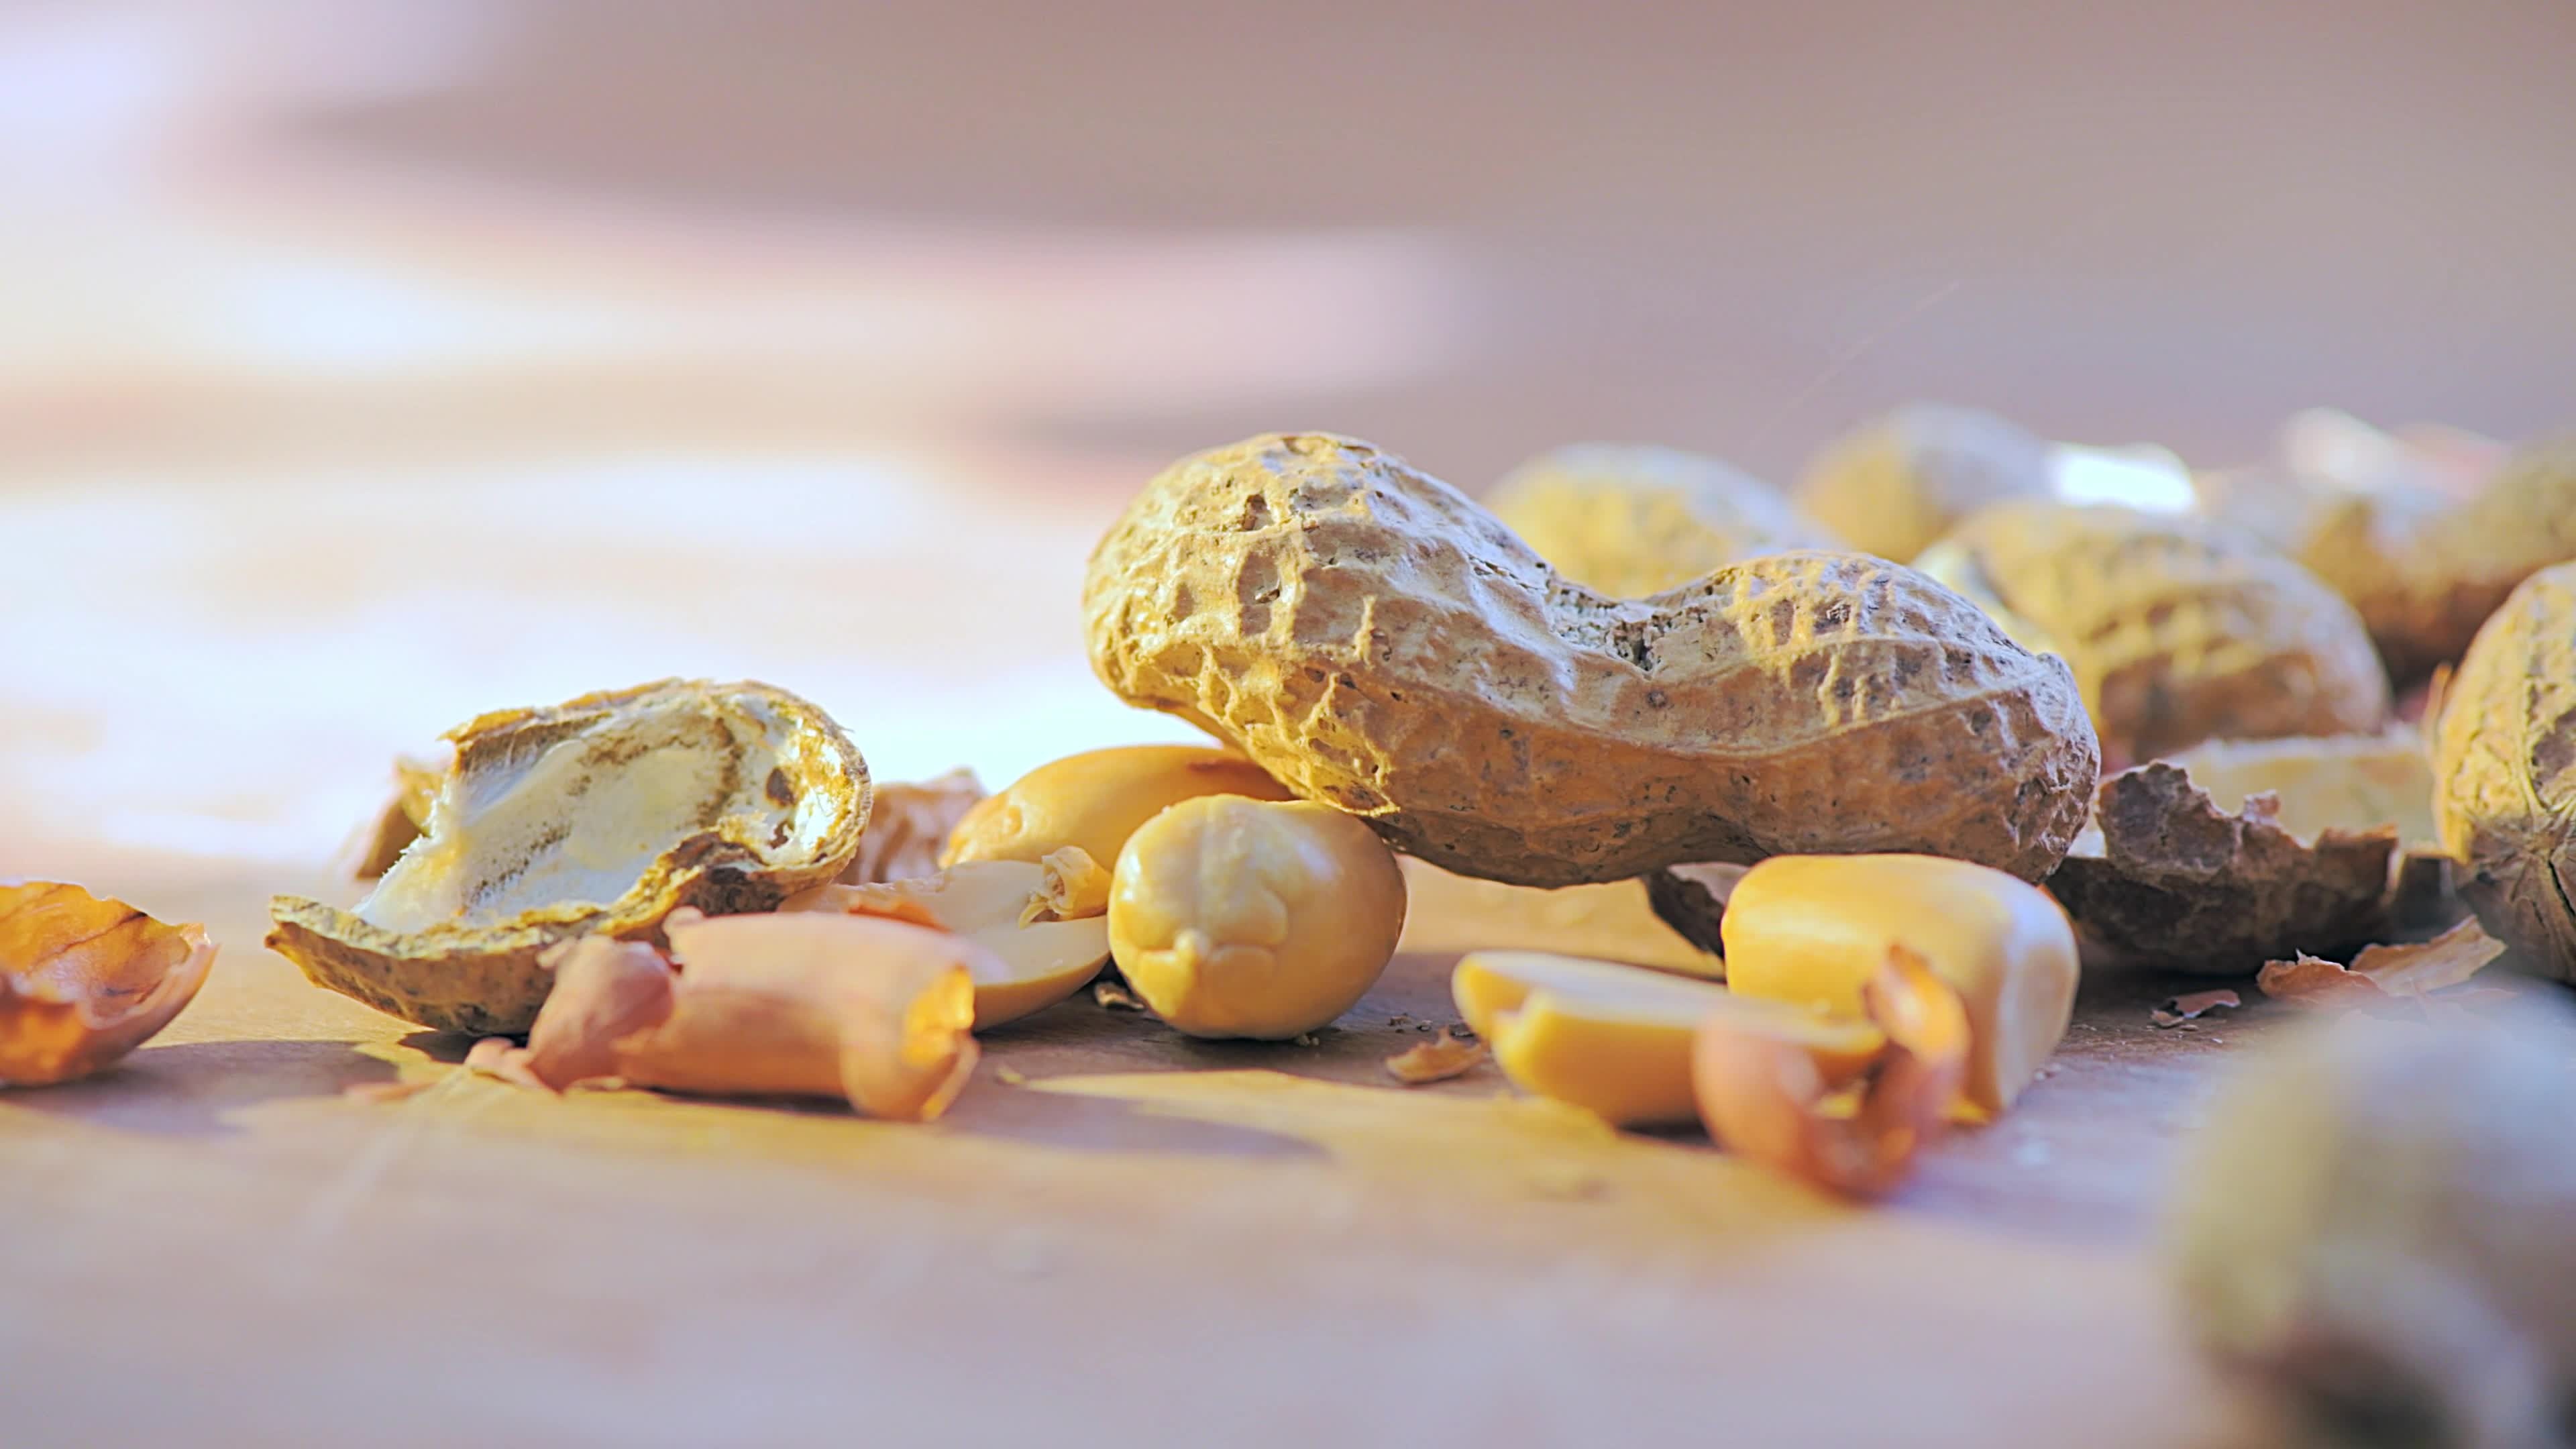 Peanuts (Food), In-shell detail, Stock video footage, Close-up view, 3840x2160 4K Desktop